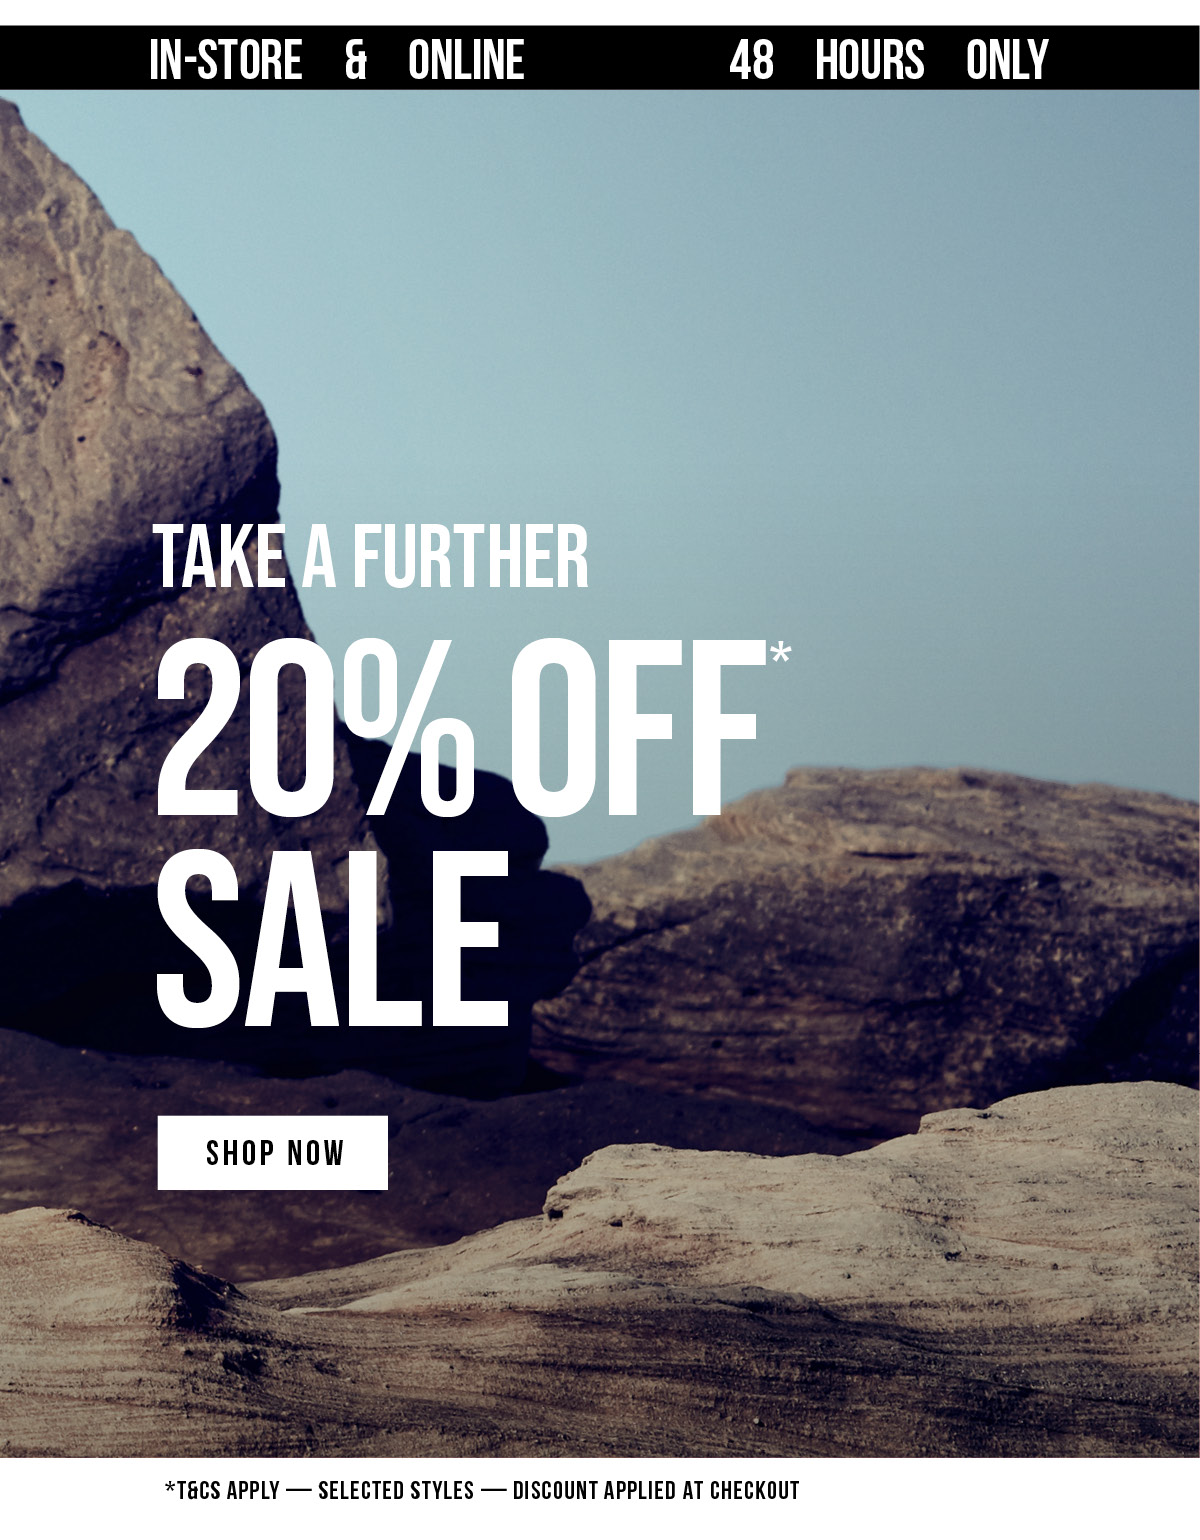 Take a further 20% off* Sale